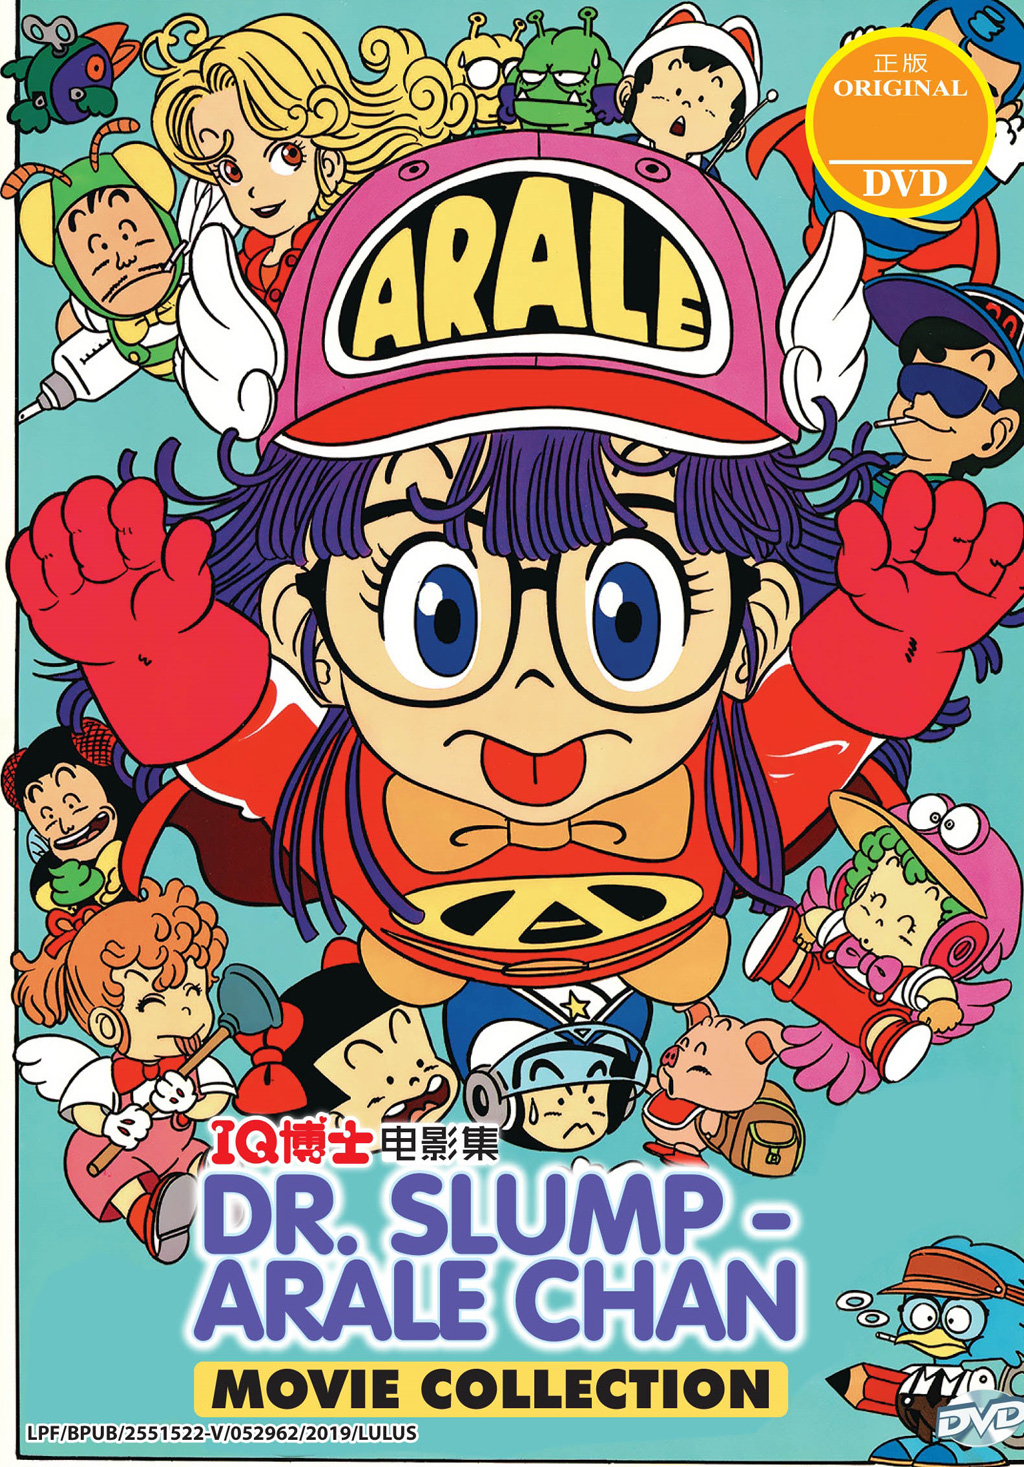 Dr. Slump - Arale Chan 11 Movie Collection (Japanese / Cantonese)